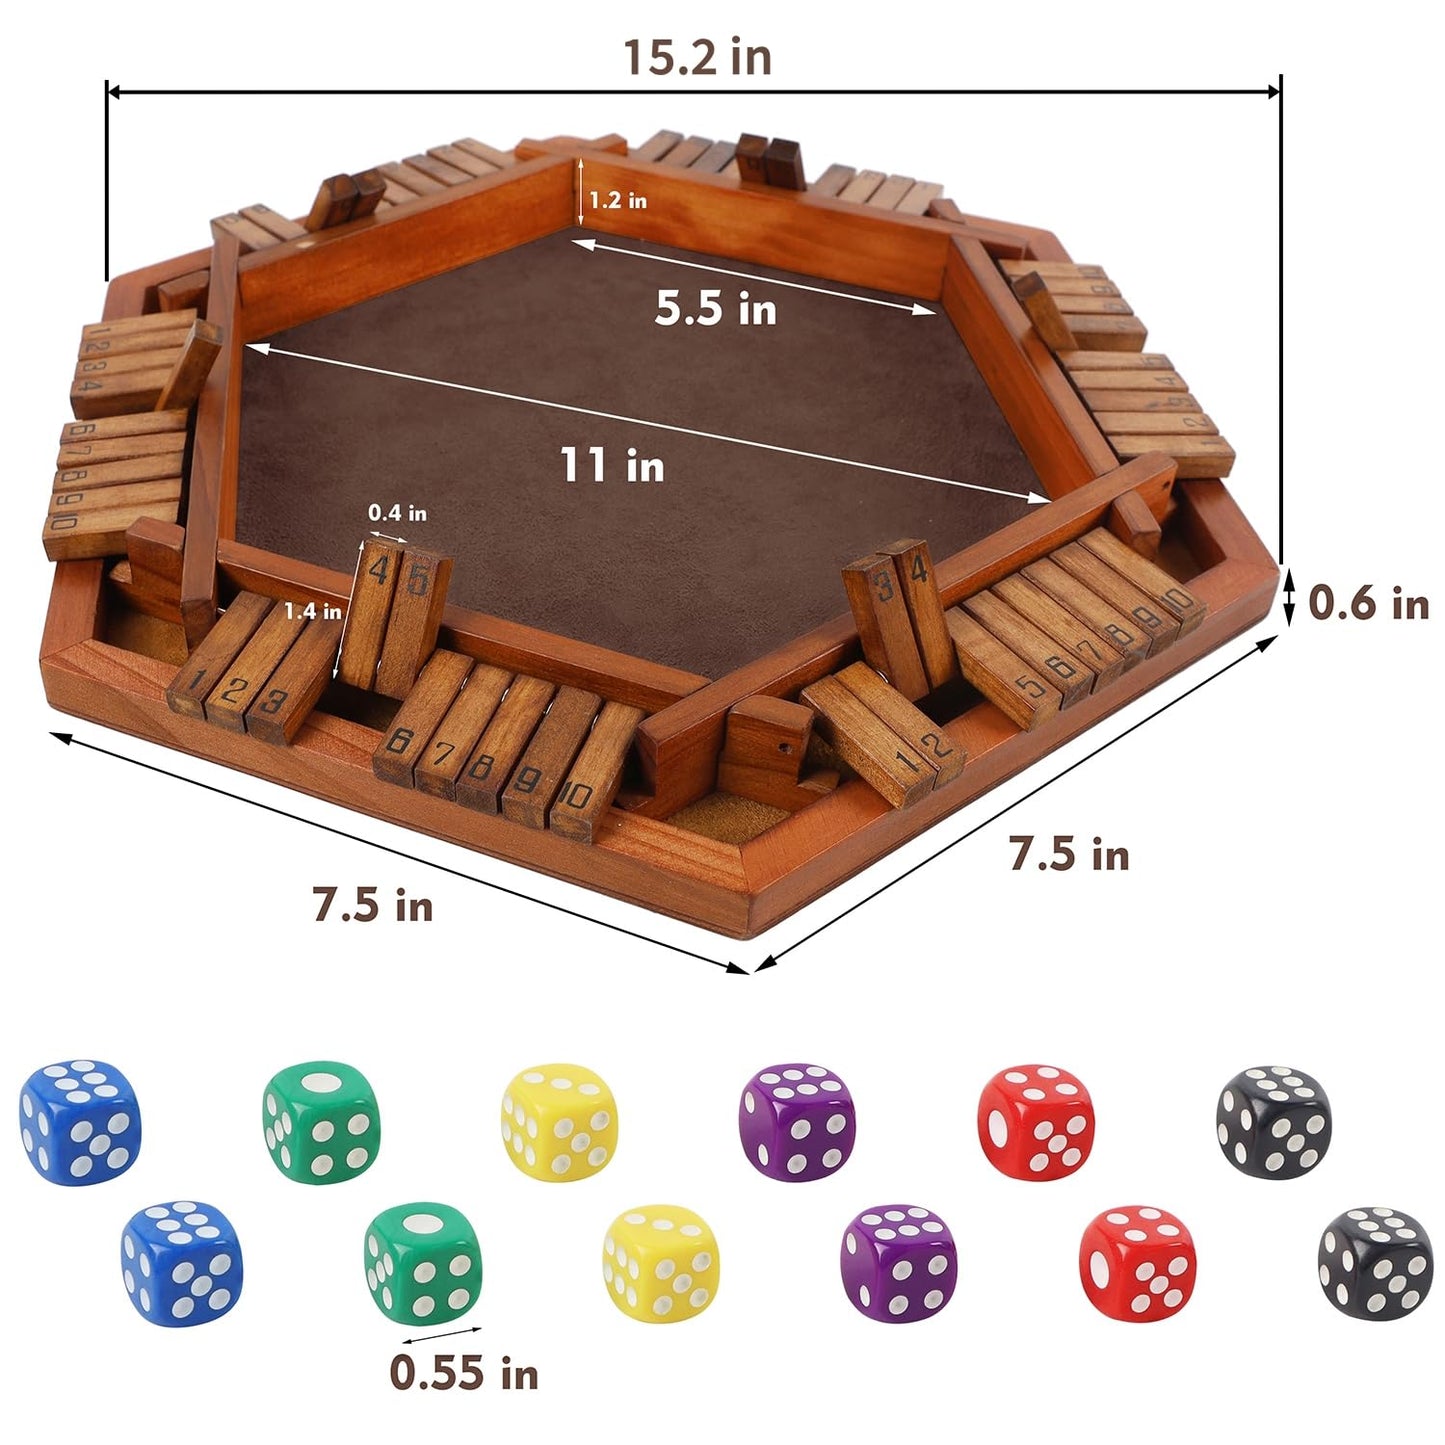 Juegoal Wooden Shut The Box Dice Game for 1-6 Players, Upgrade Tabletop Board Game with 12 Dice for Kids Adults Families, Classics Travel Portable